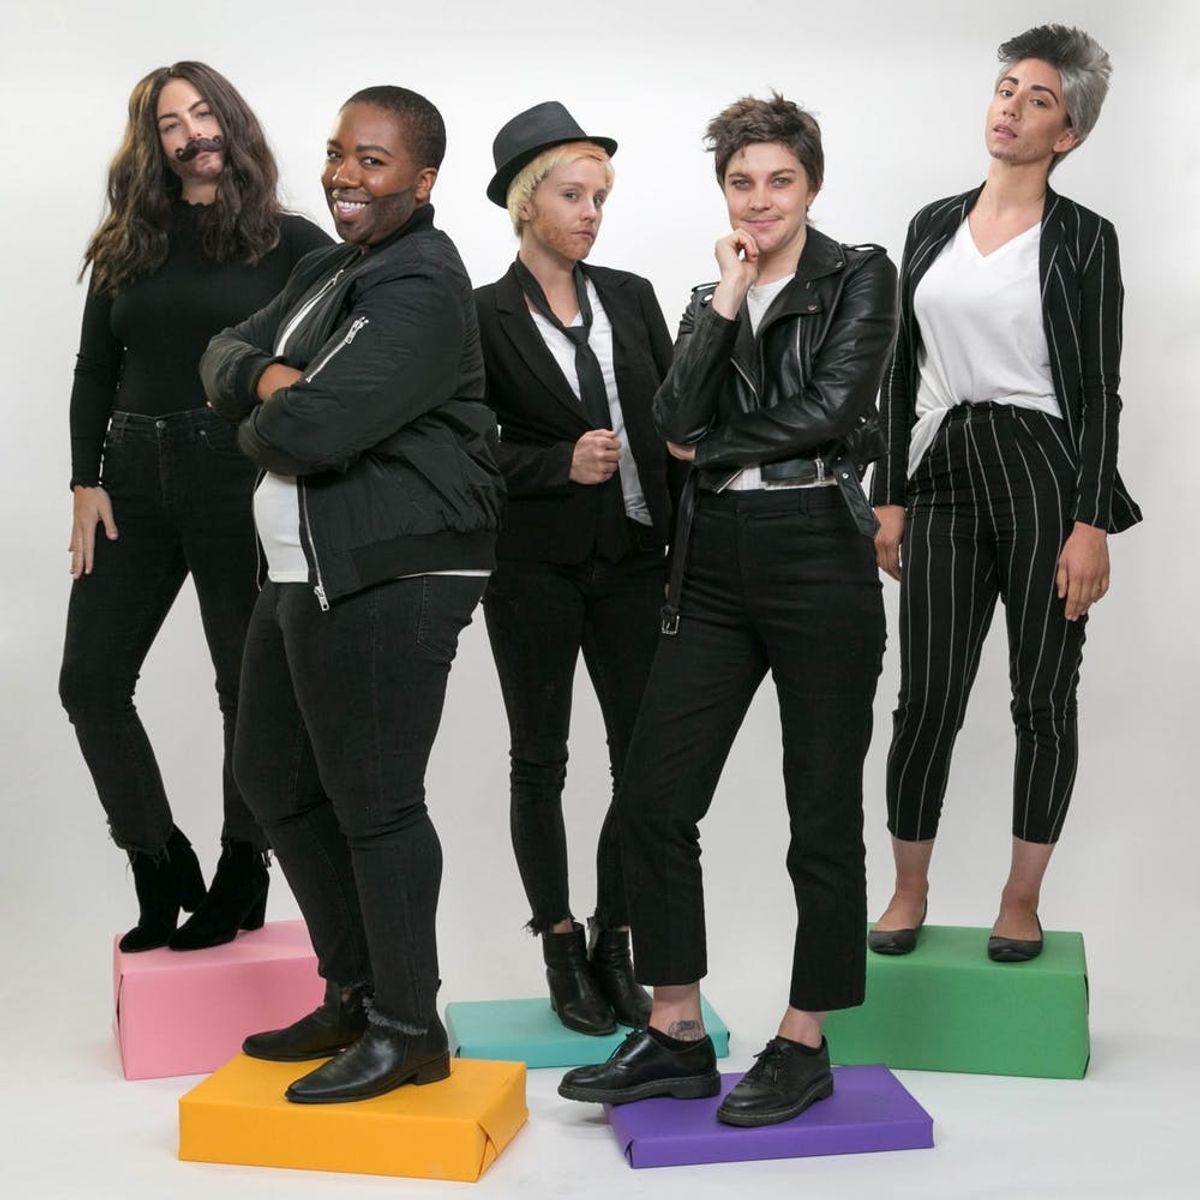 Make Over Your Fab Five for This ‘Queer Eye’ Group Halloween Costume